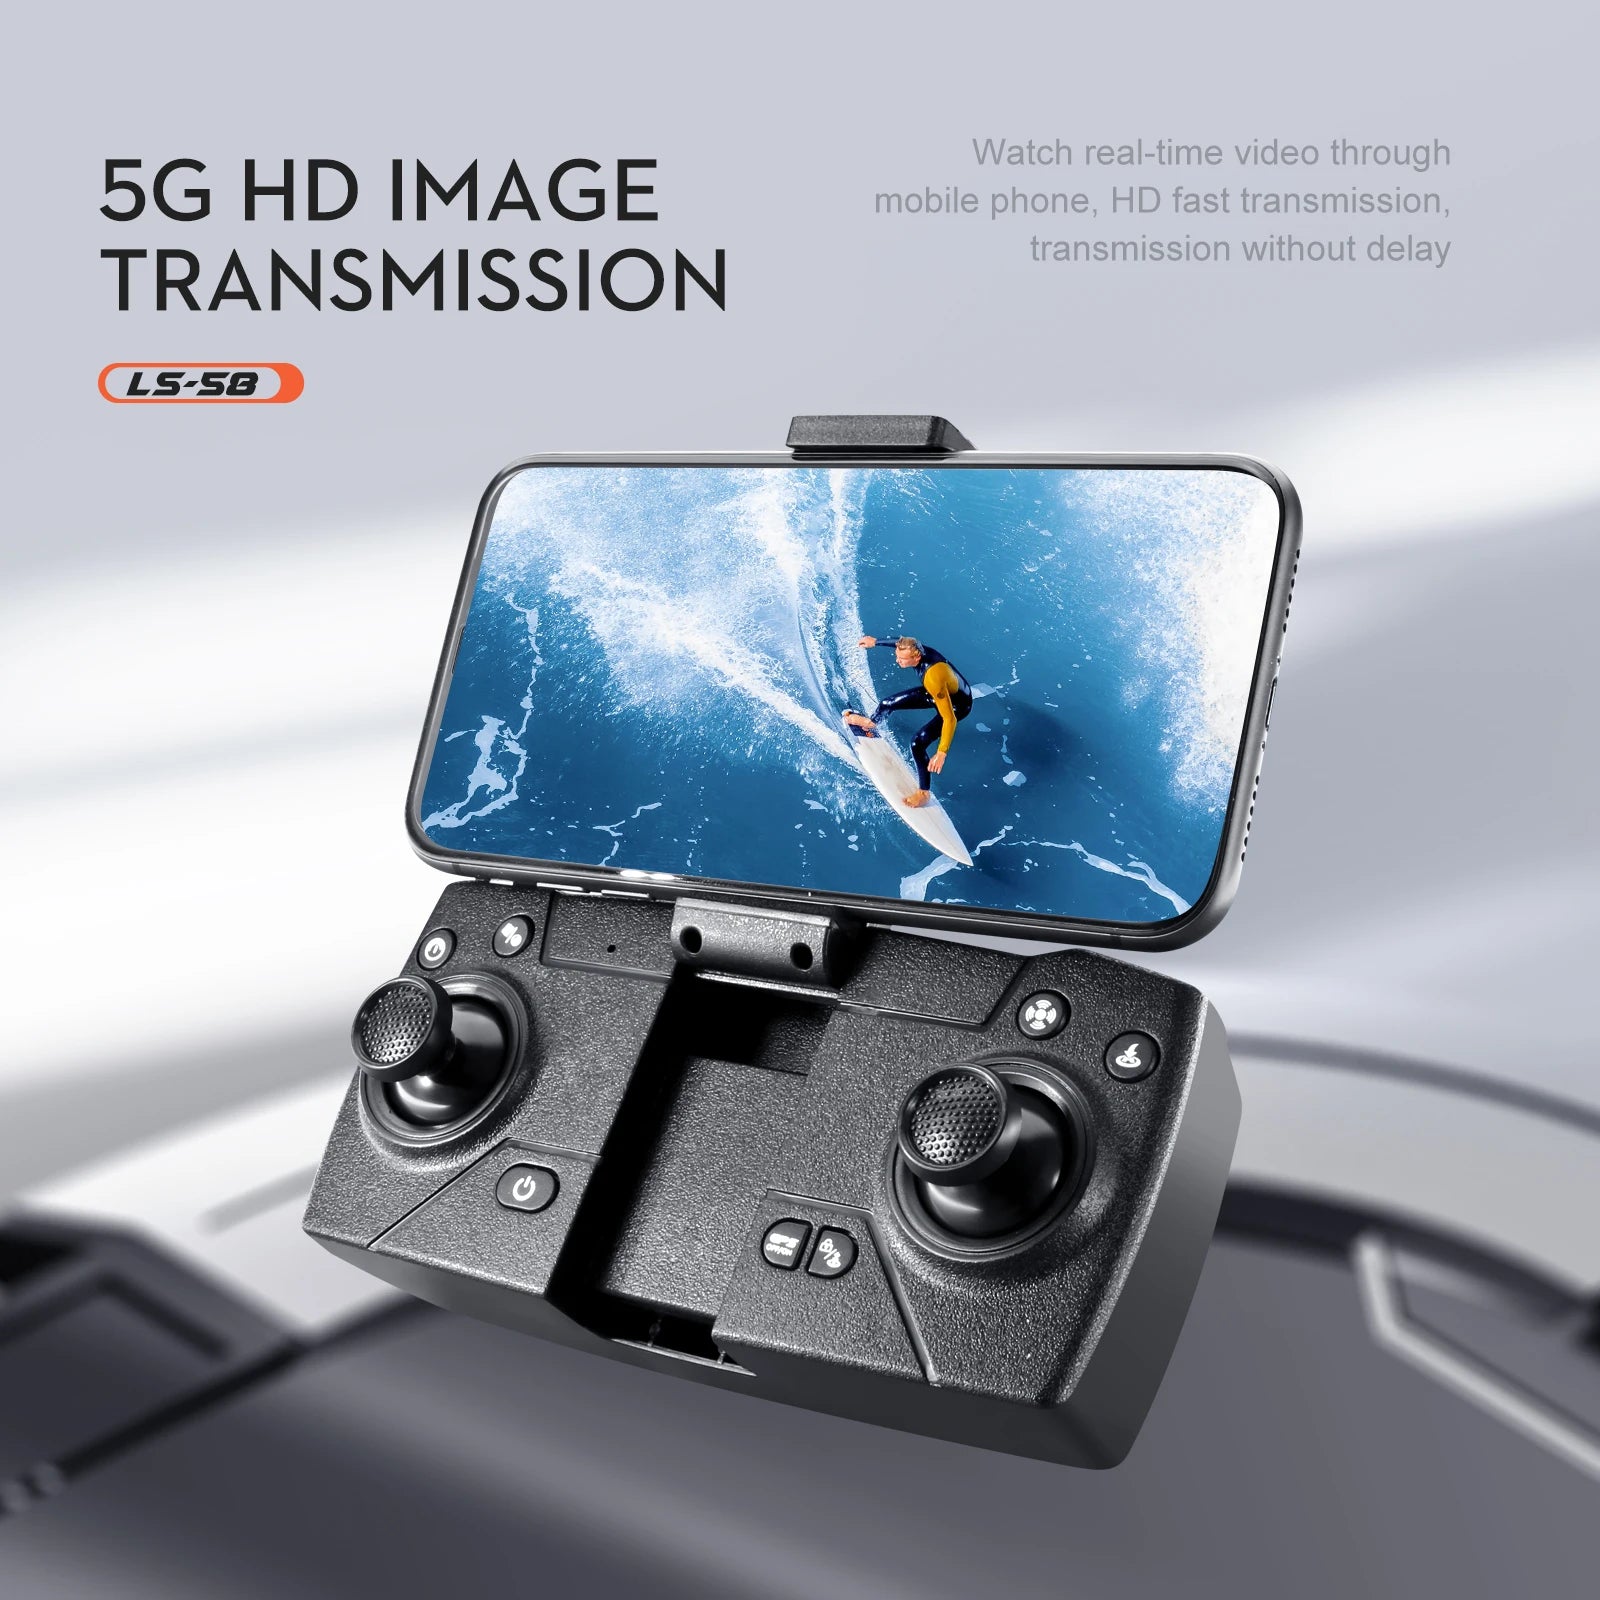 LS58 Drone, watch real-time video through 56 hd image mobile phone;